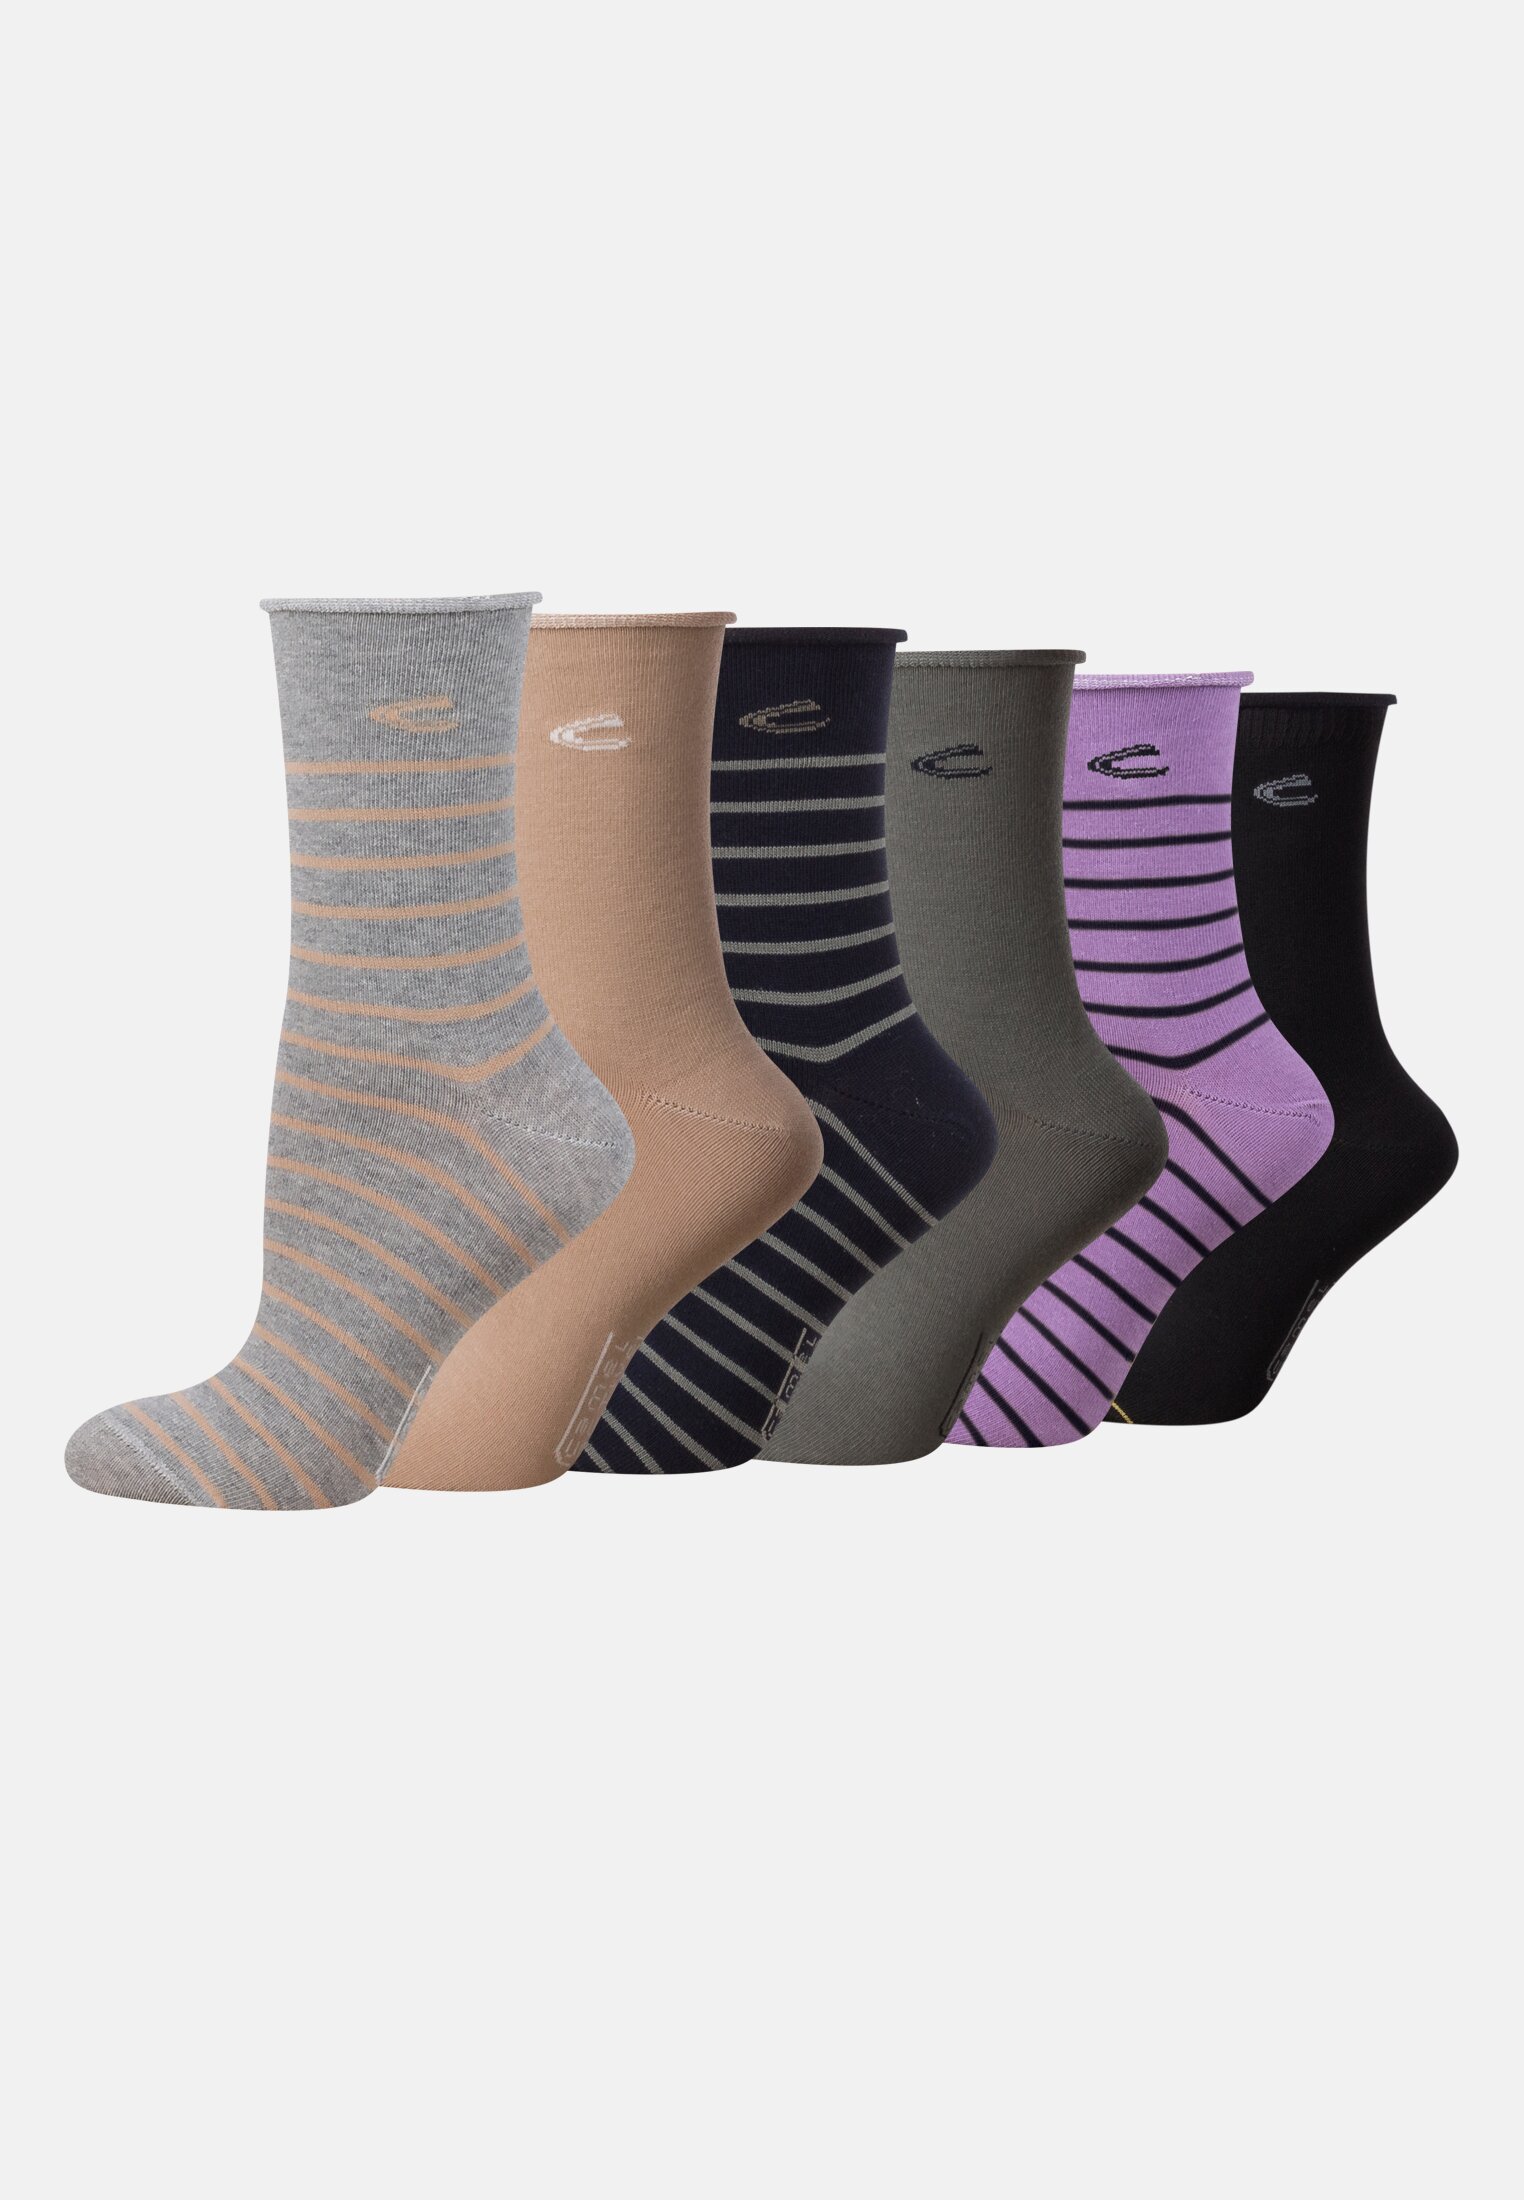 Camel Active Striped socks in a pack of 6